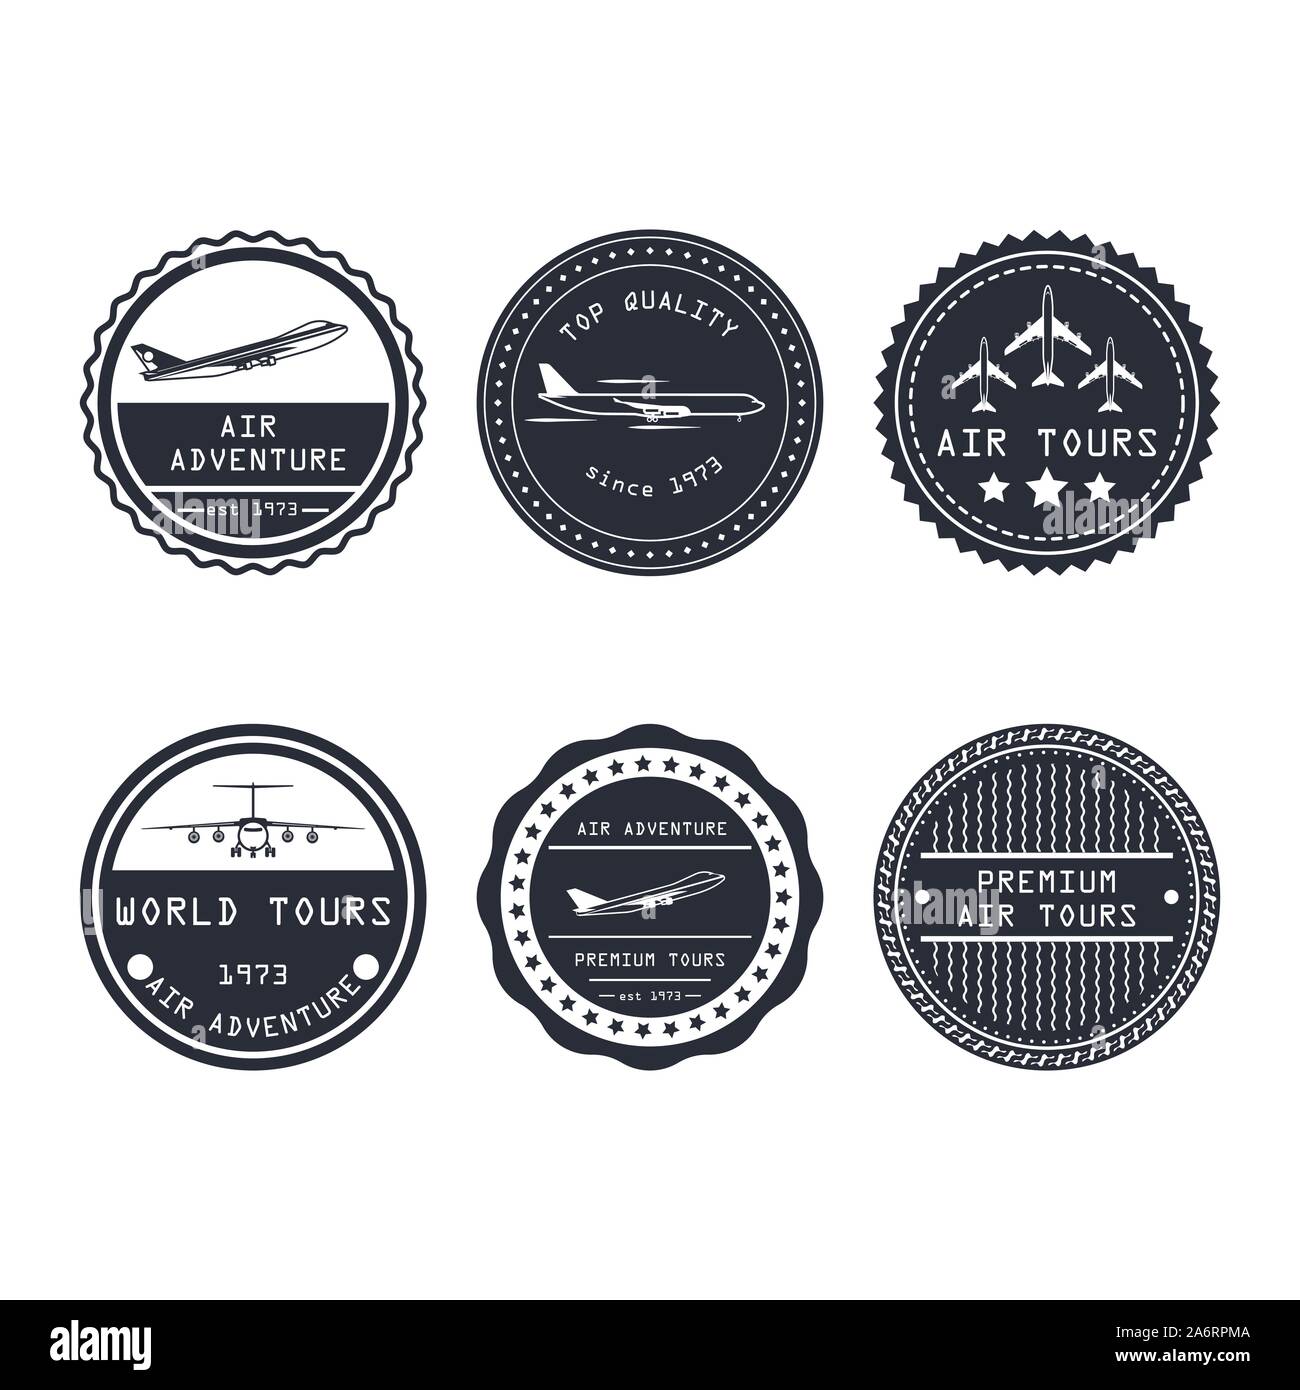 WINGS OF THE WORLD Vintage Travel Sticker Set